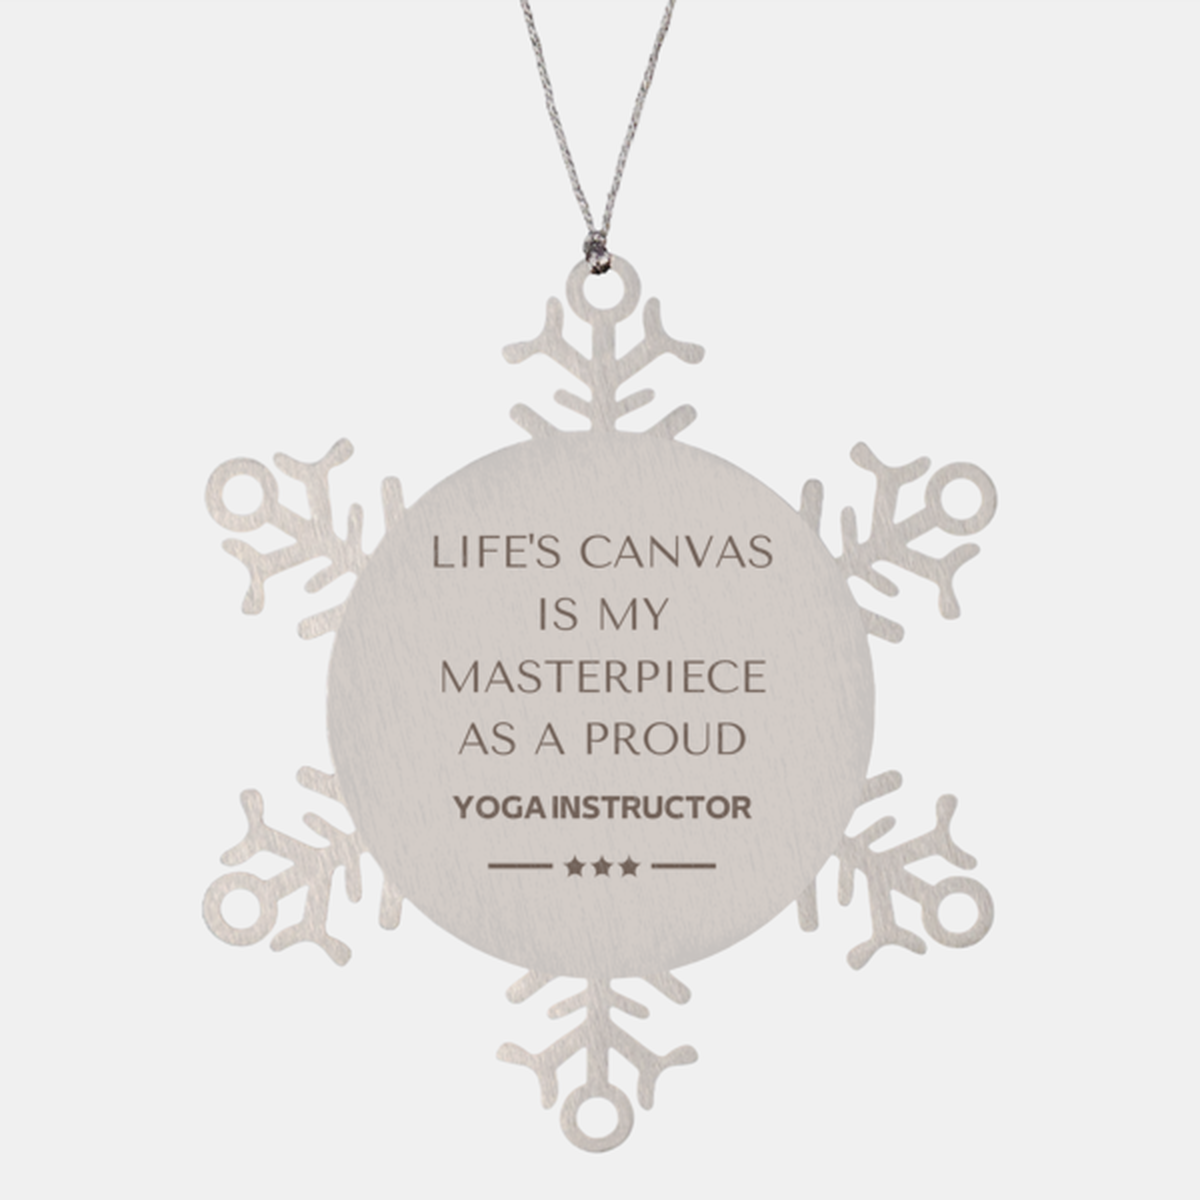 Proud Yoga Instructor Gifts, Life's canvas is my masterpiece, Epic Birthday Christmas Unique Snowflake Ornament For Yoga Instructor, Coworkers, Men, Women, Friends